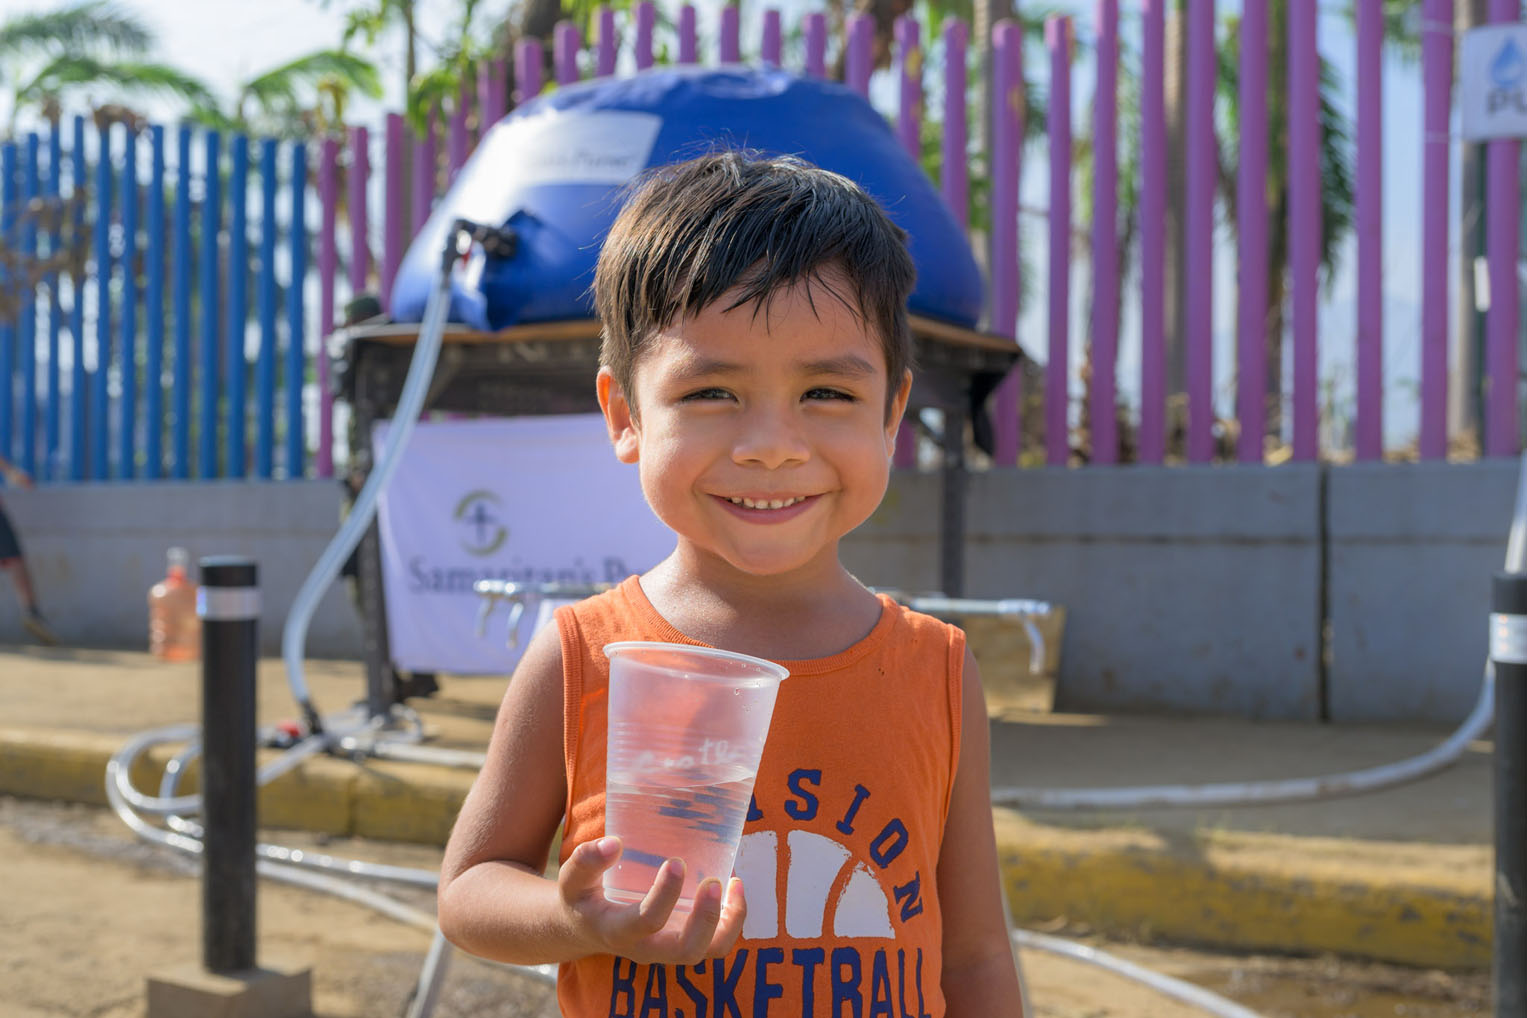 Samaritan's Purse provides clean water to communiities in the wake of natural disasters or other calamities, saving many lives and preventing waterborne illness, especially in young children.